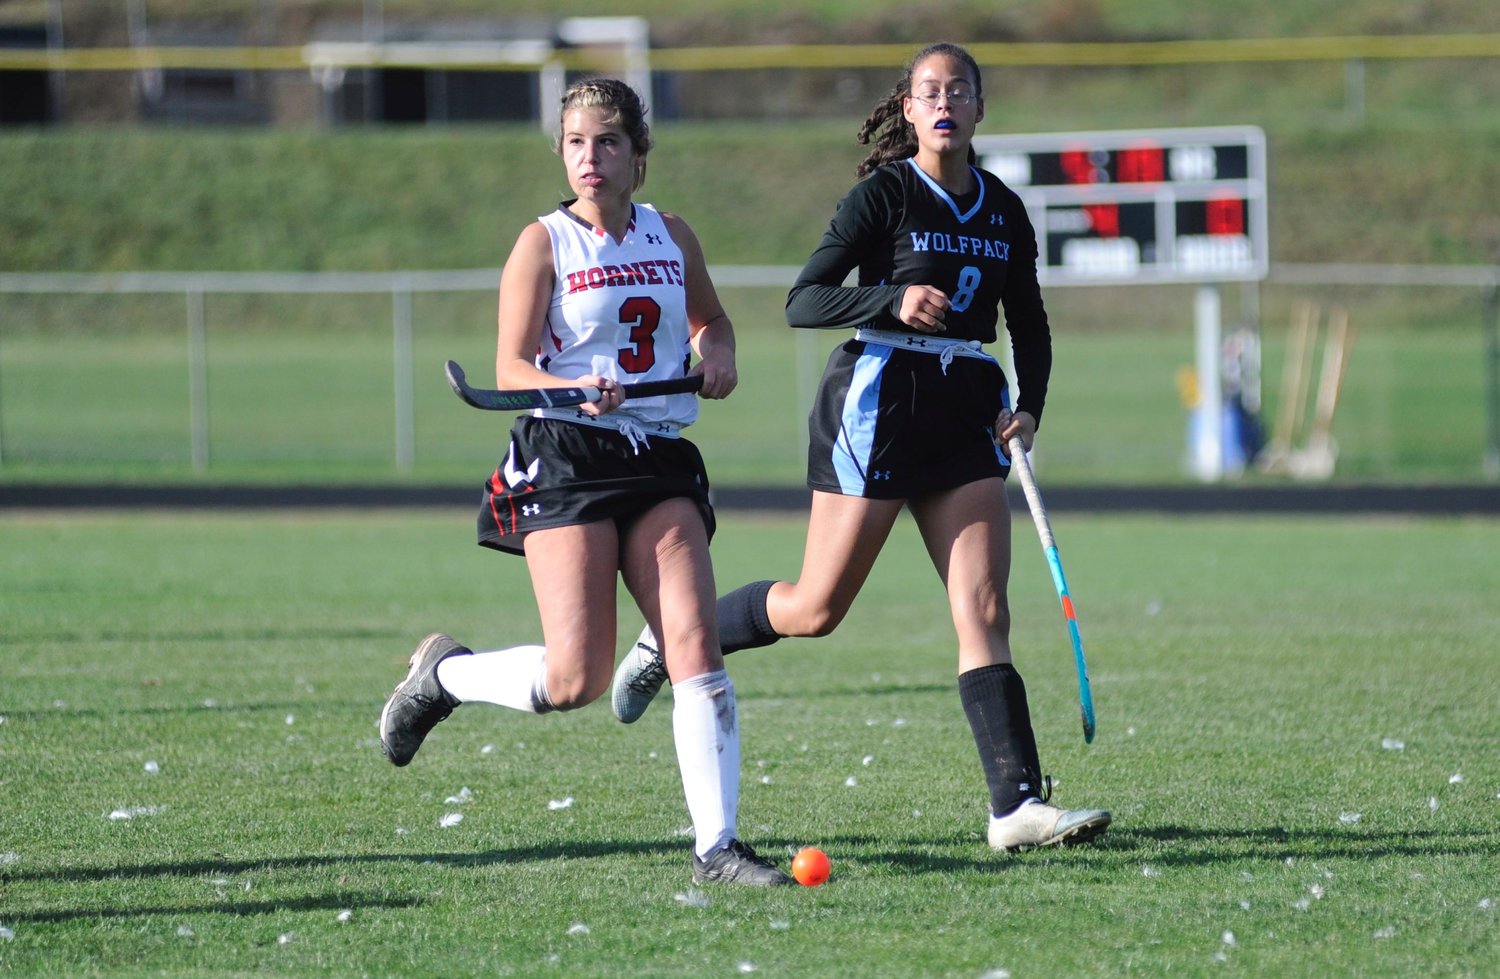 Synchronicity in motion. Honesdale’s Brynn McGinnis and Wilkes Barre’s Selena Everts match each other stride-for-stride.